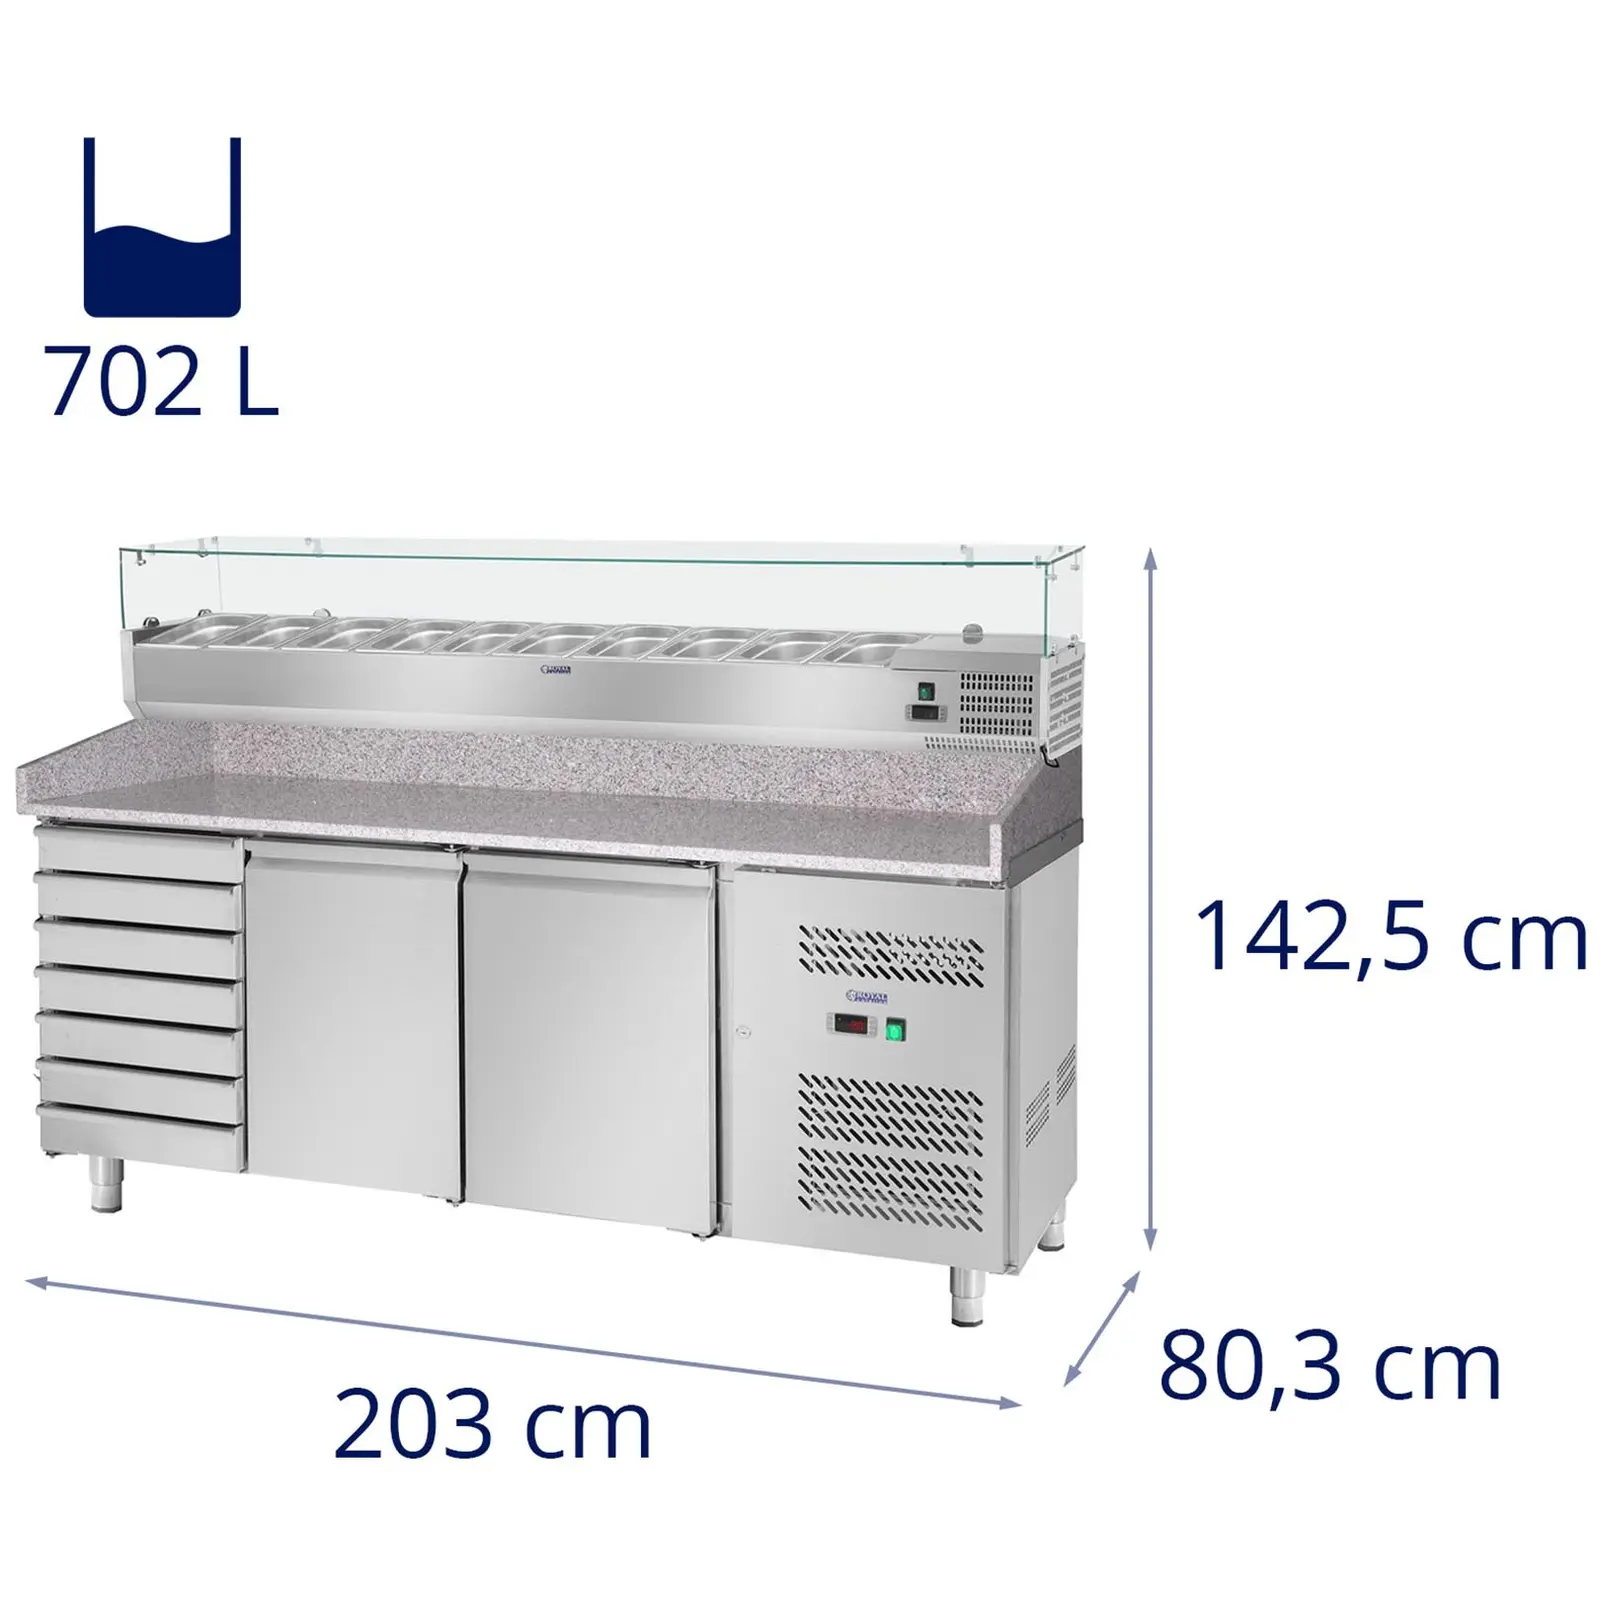 Cooling Table - Cooling Attachment - 702 L - Granite Counter - 2 Doors